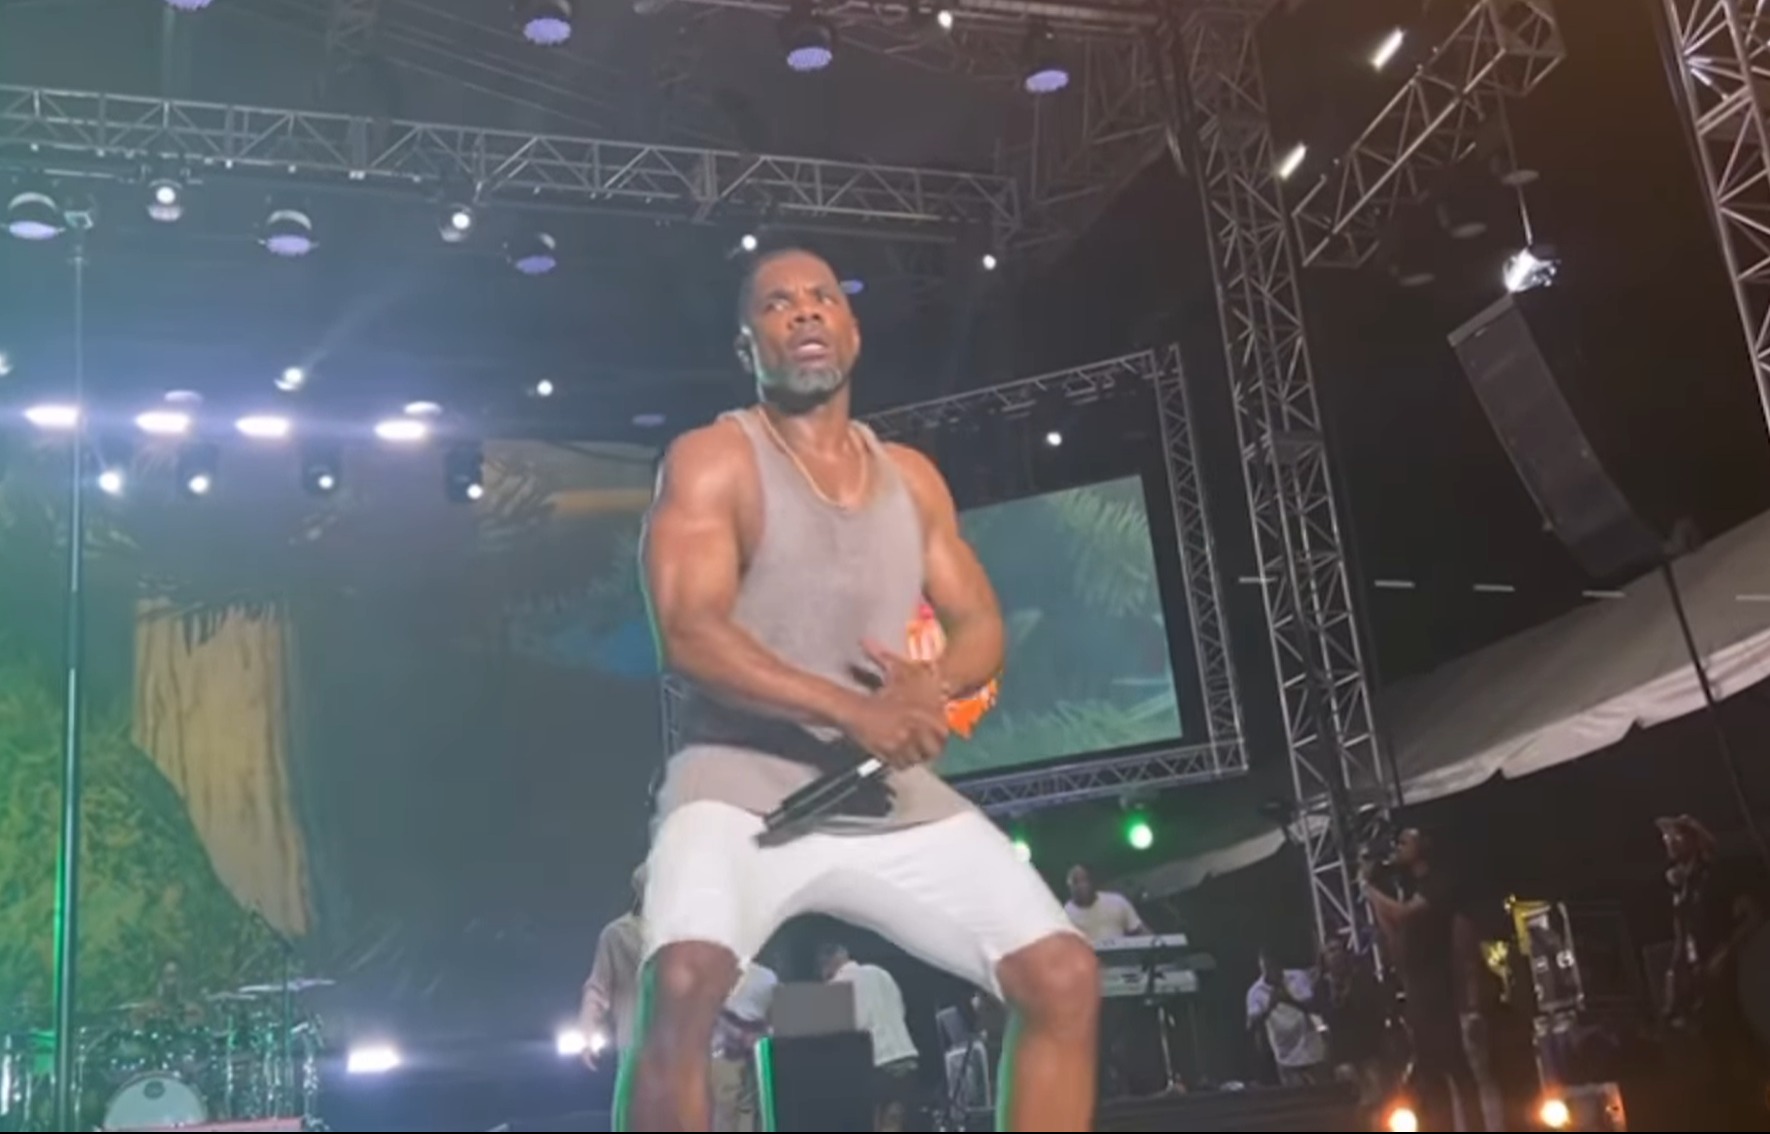 Kirk Franklin draws the ire of Christians because of his dress and performance at Jamaican gospel concerts